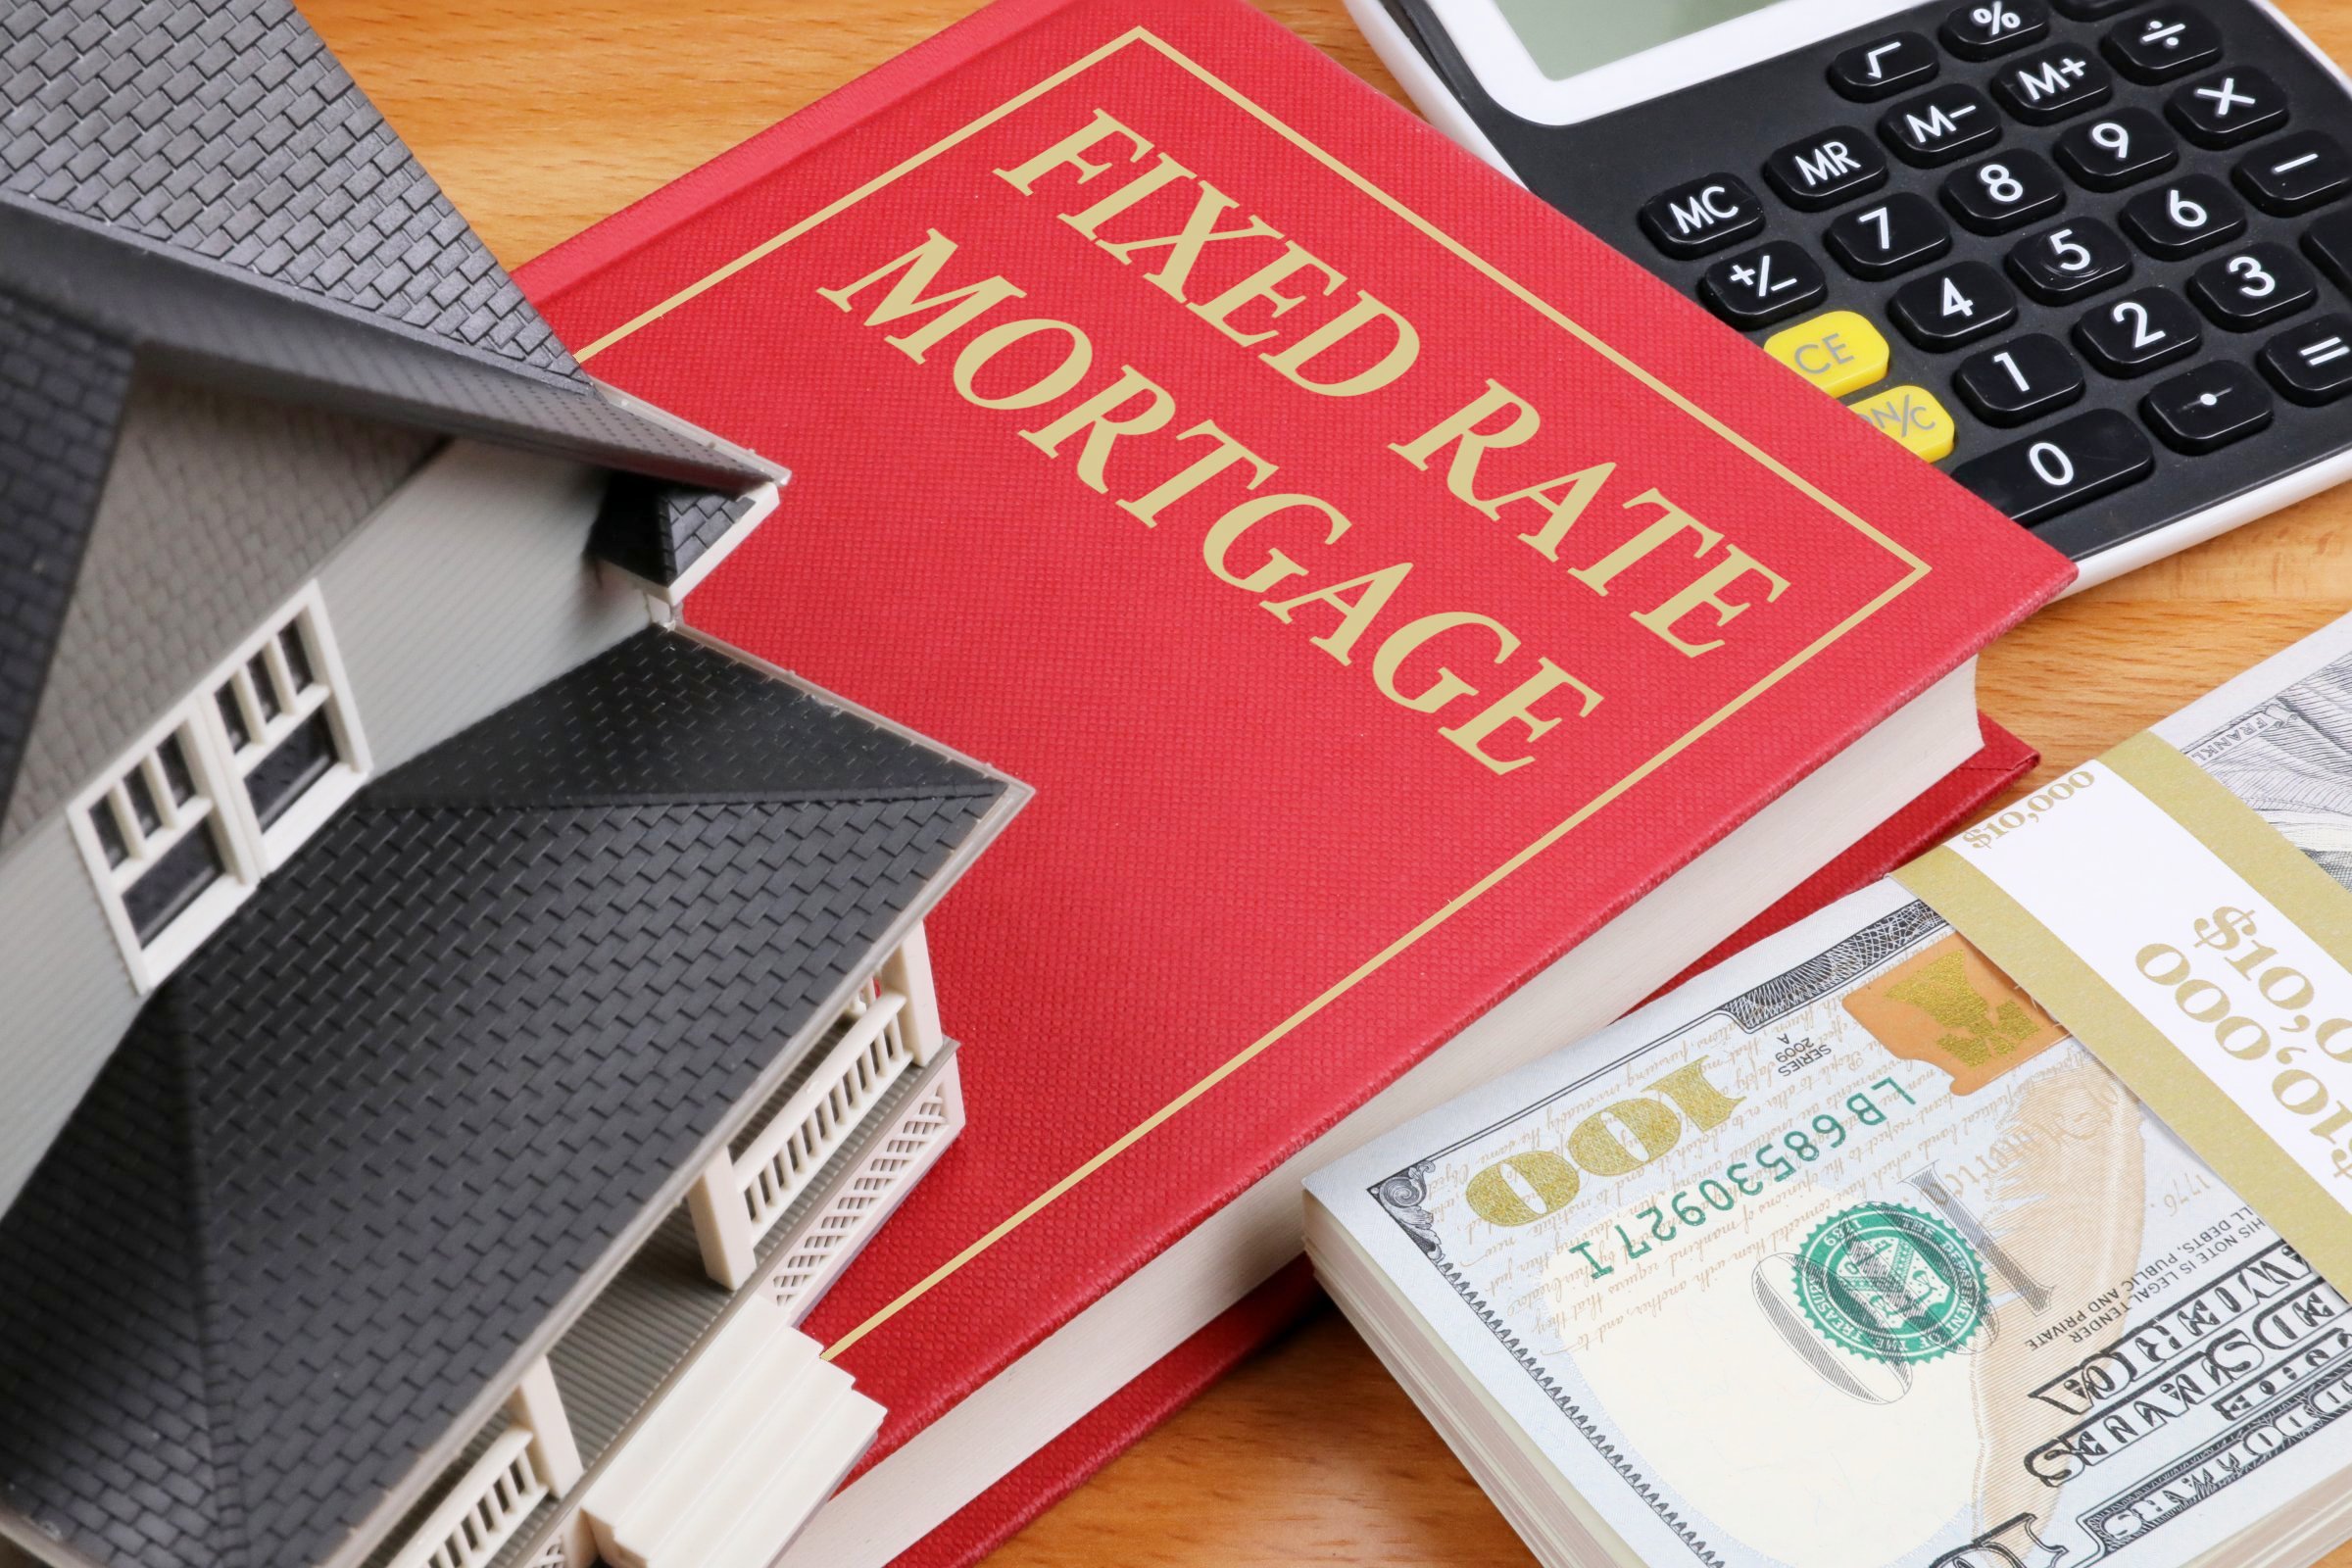 fixed rate mortgage